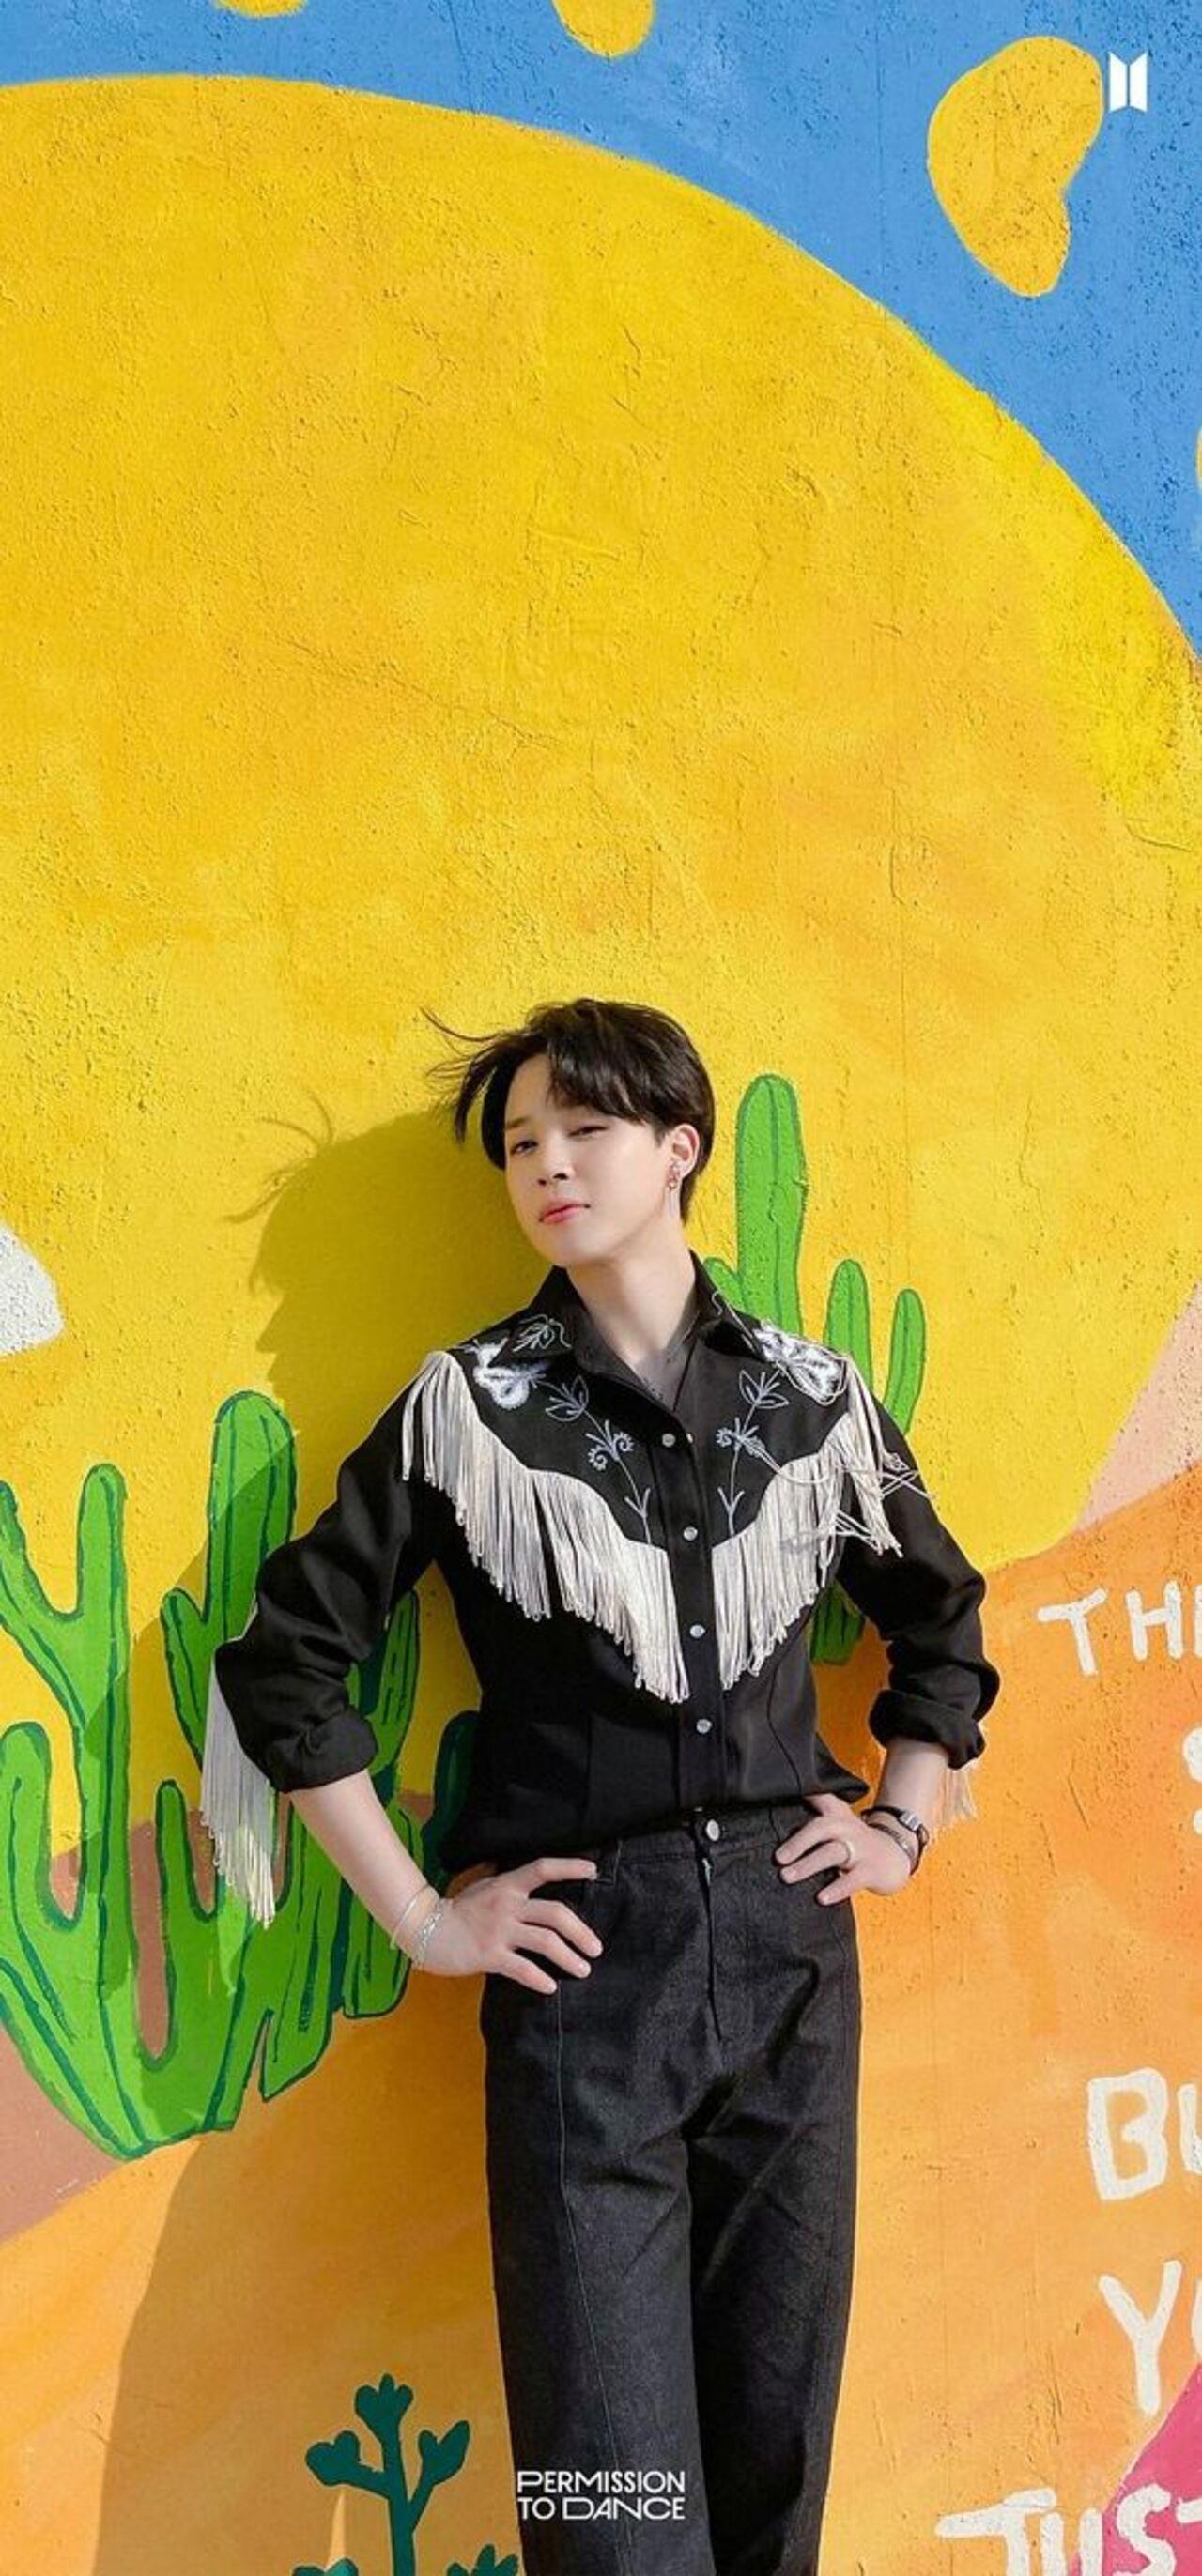 Does this outfit appear familiar to even you, non-ARMYs? Yes, that's right, this 'Permission to Dance' style was also borrowed by Ryan Kosling aka Ken for the Greta Gerwig hit movie, 'Barbie.' Jimin exudes the perfect summer-style energy with this all-black outfit with tassels